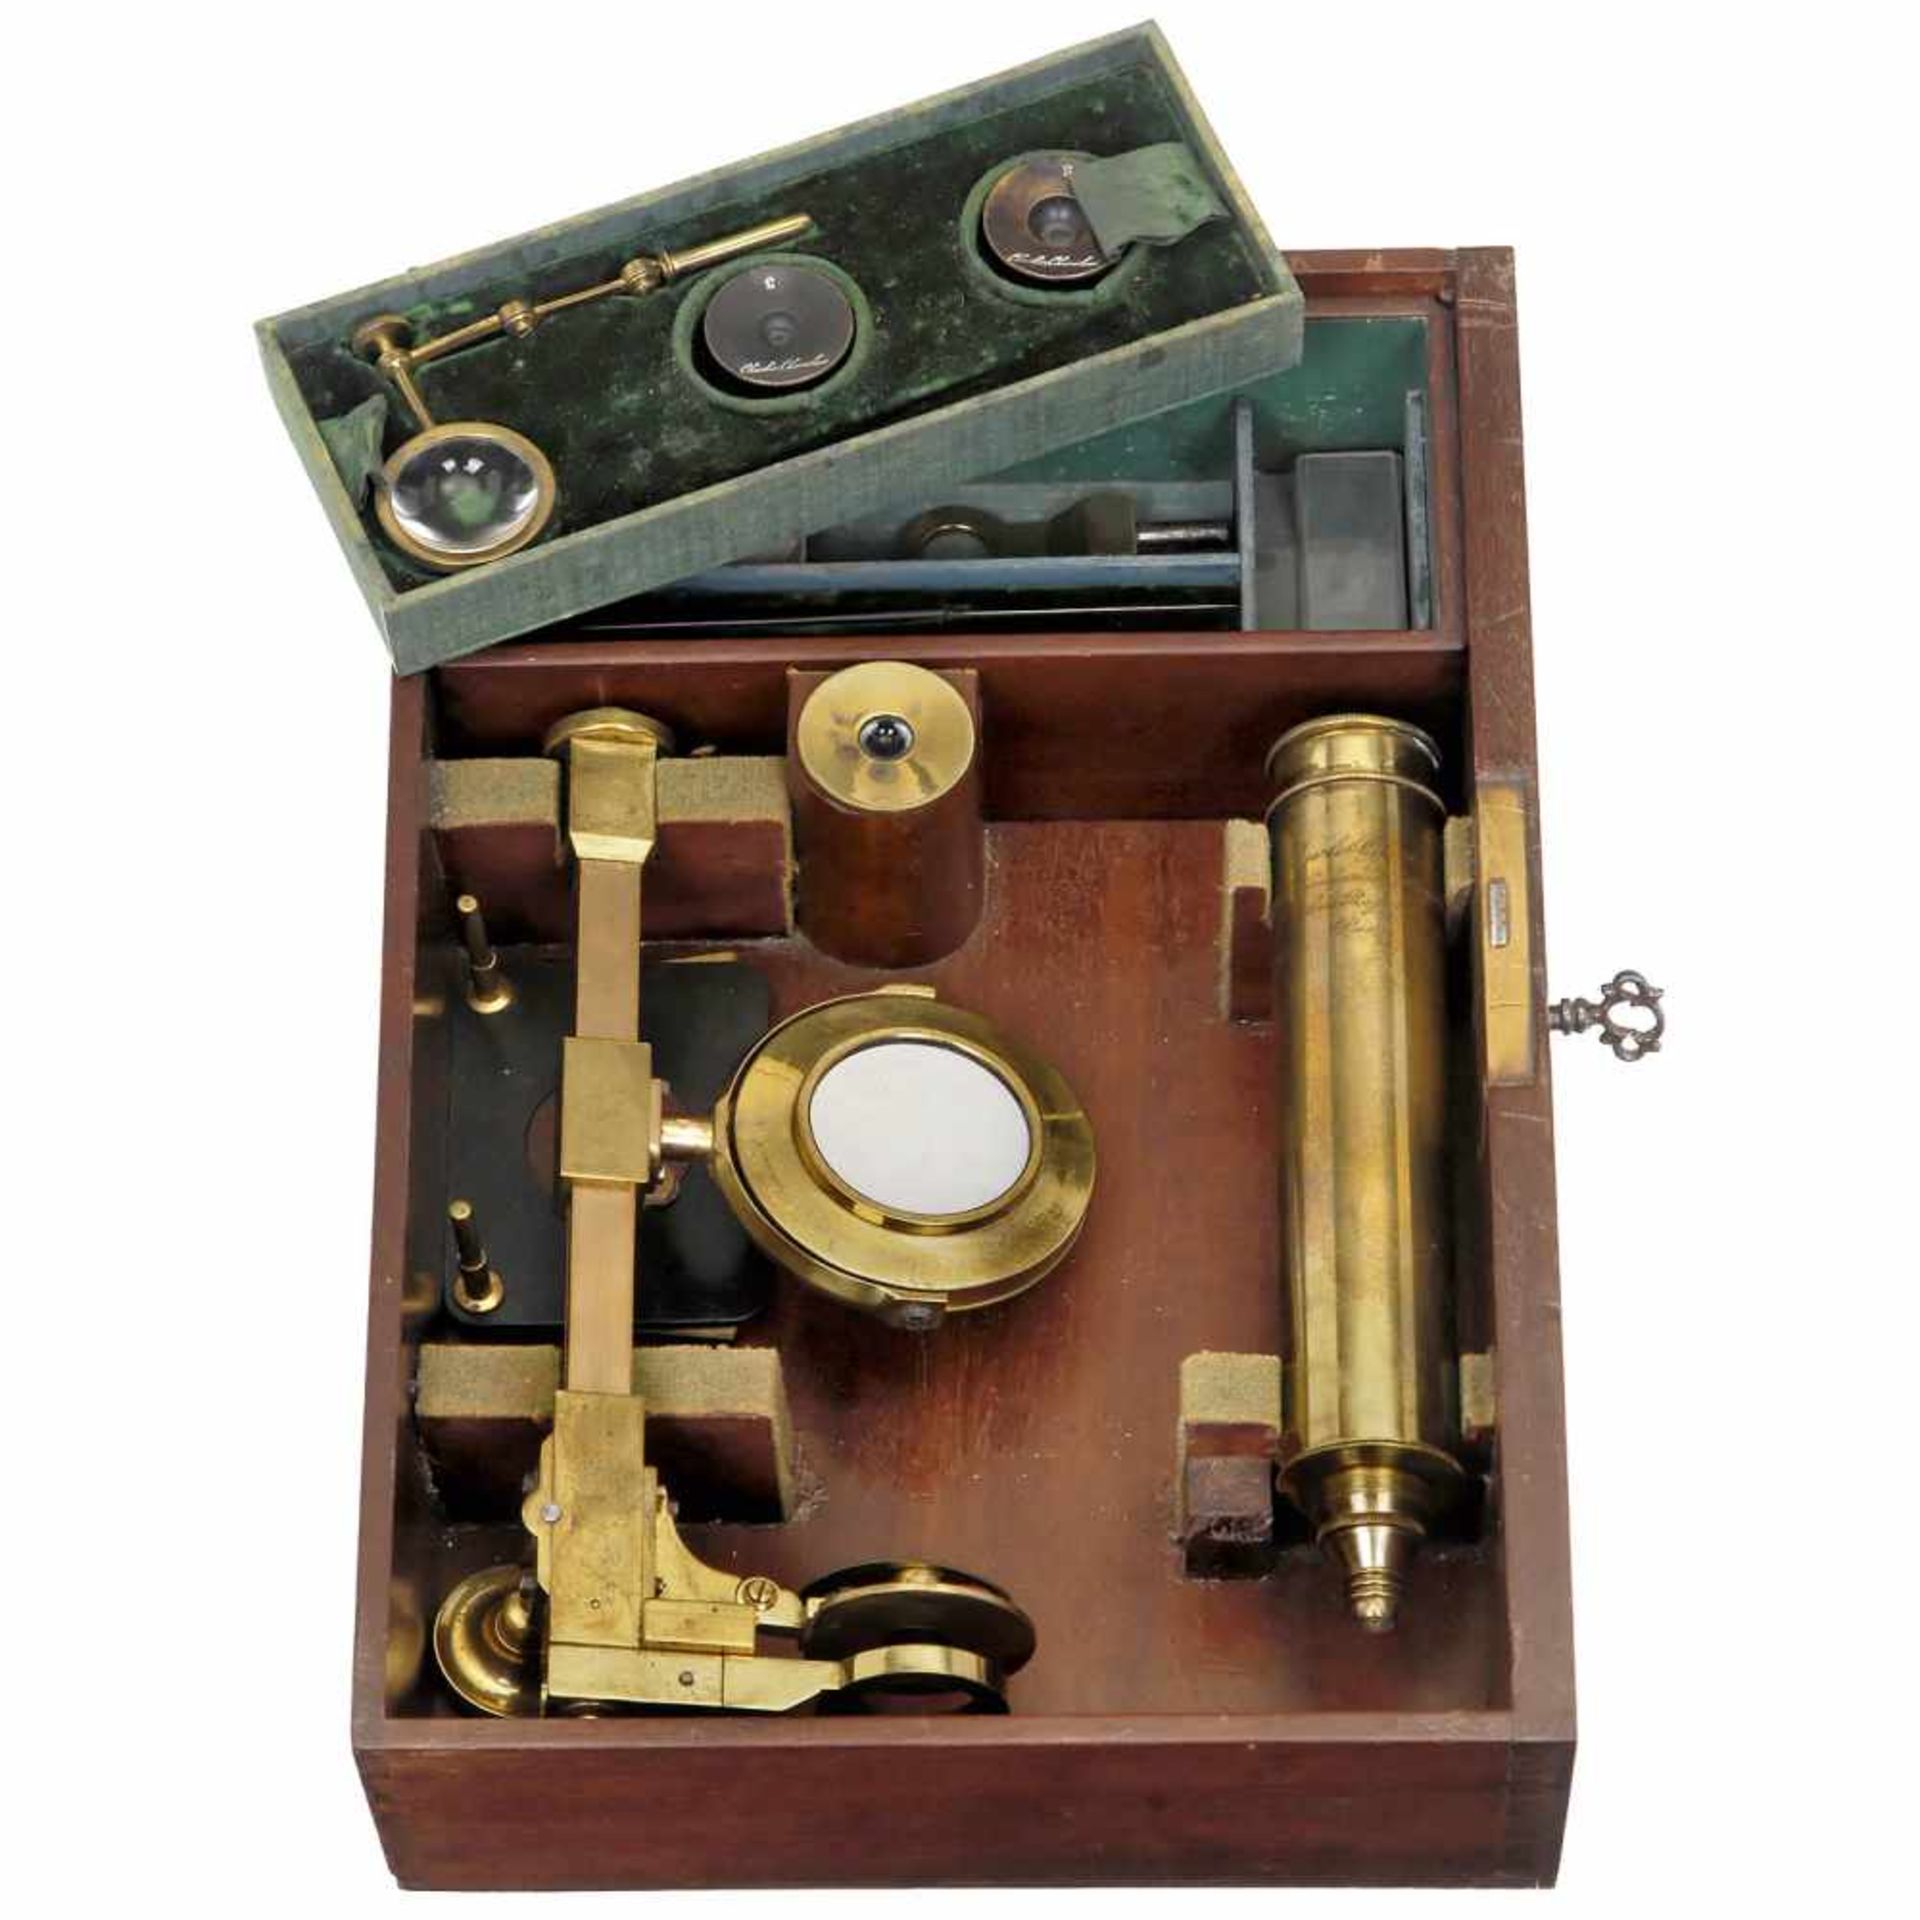 Early French Compound Microscope by Chevalier, c. 1850Signed on the tube: "Charles Chevalier, - Bild 2 aus 2